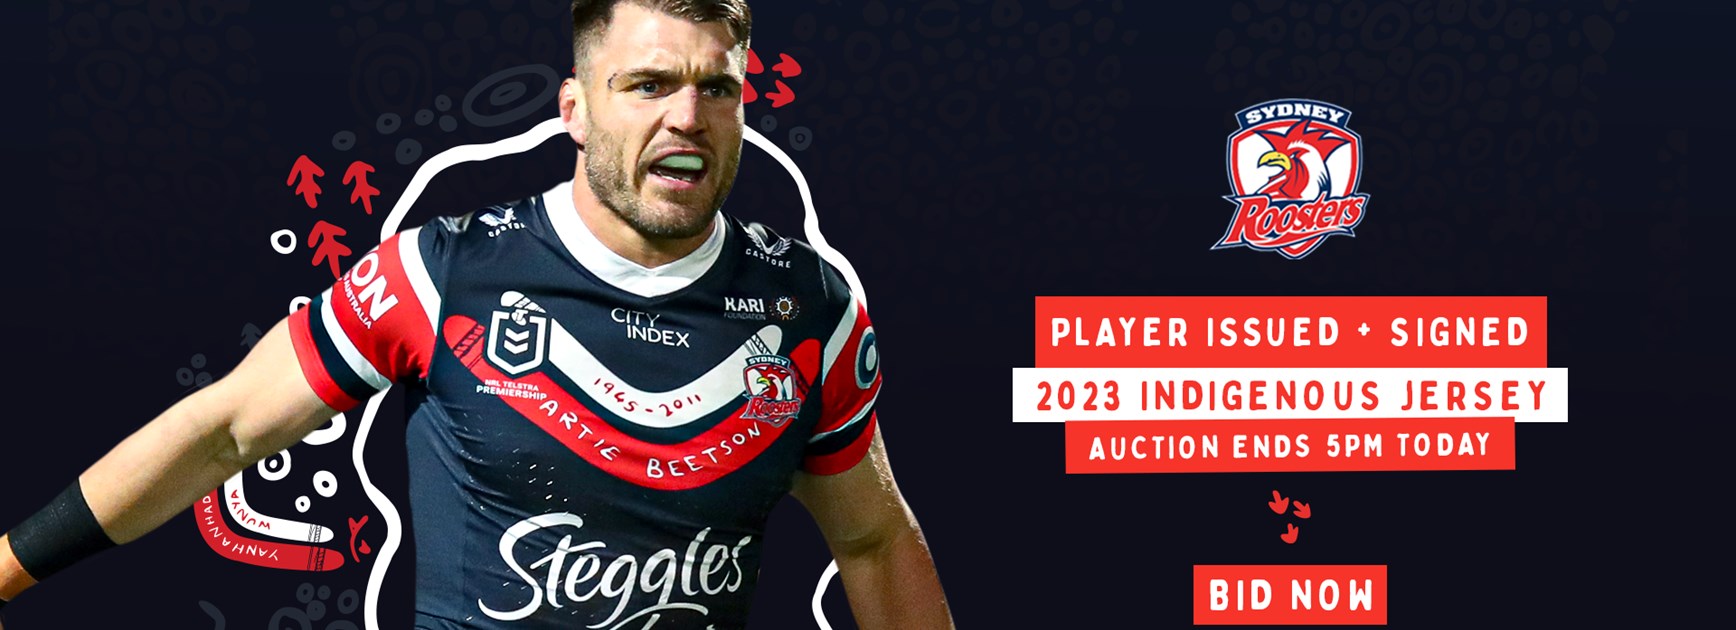 Roosters 2023 Indigenous Jersey Auction Now Closed